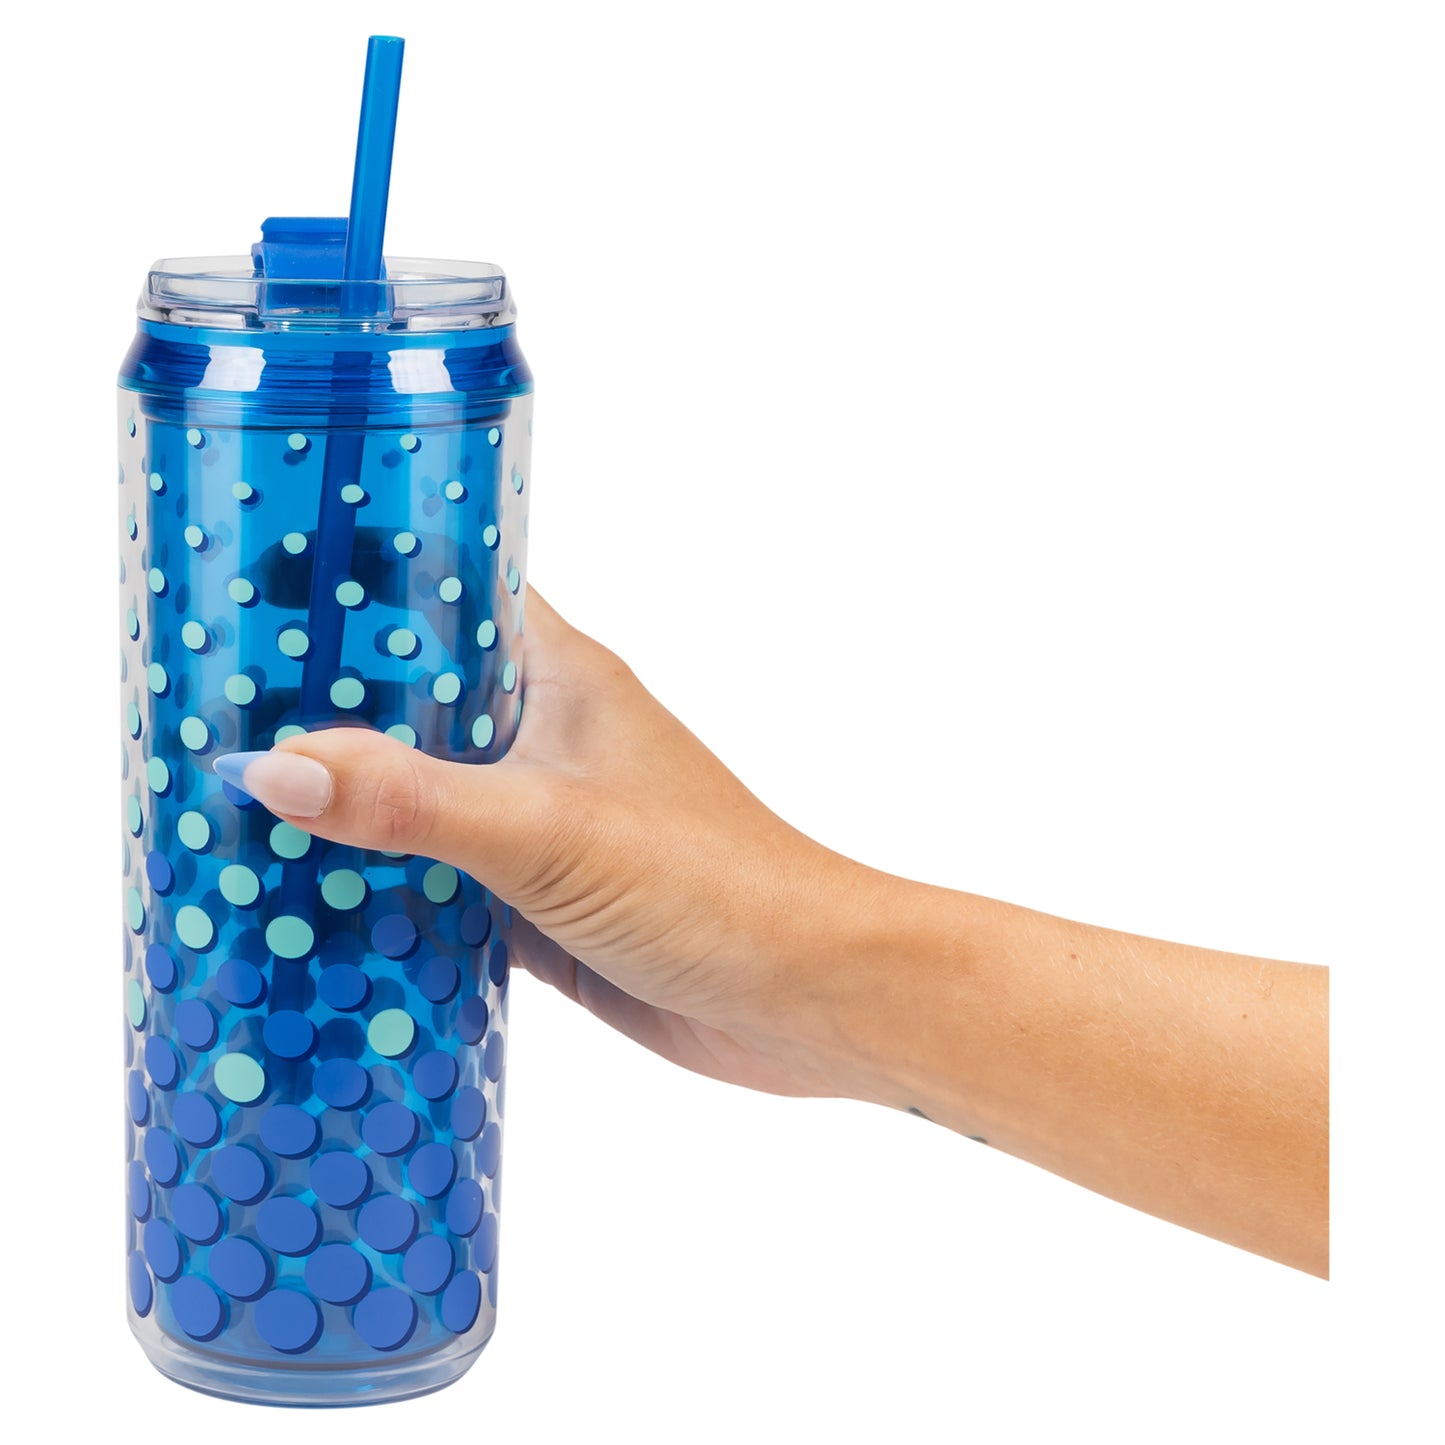 Cool Gear 3-Pack Modern Tumbler with Reusable Straw | Dishwasher Safe, Cup Holder Friendly, Spillproof, Double-Wall Insulated Travel Tumbler | Printed Dots Pack